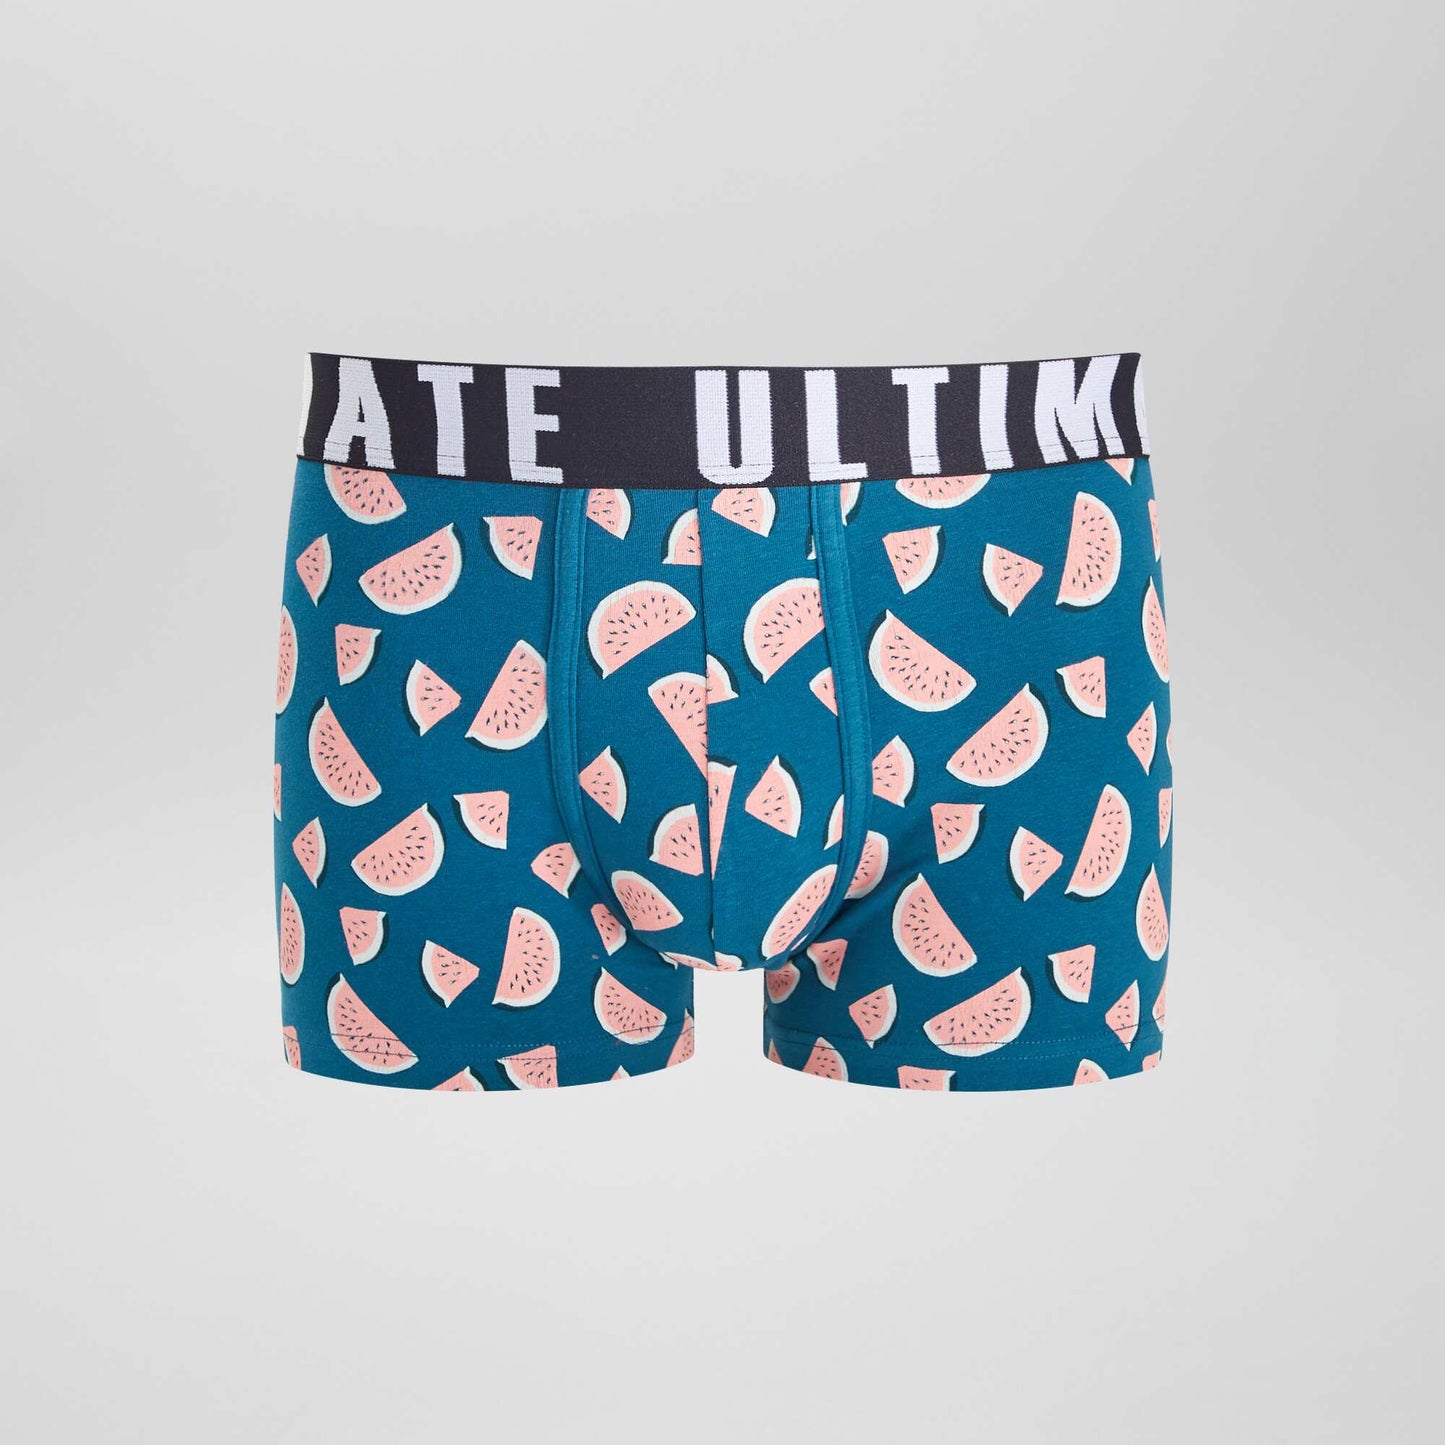 Pack of 3 patterned boxer shorts BLUE